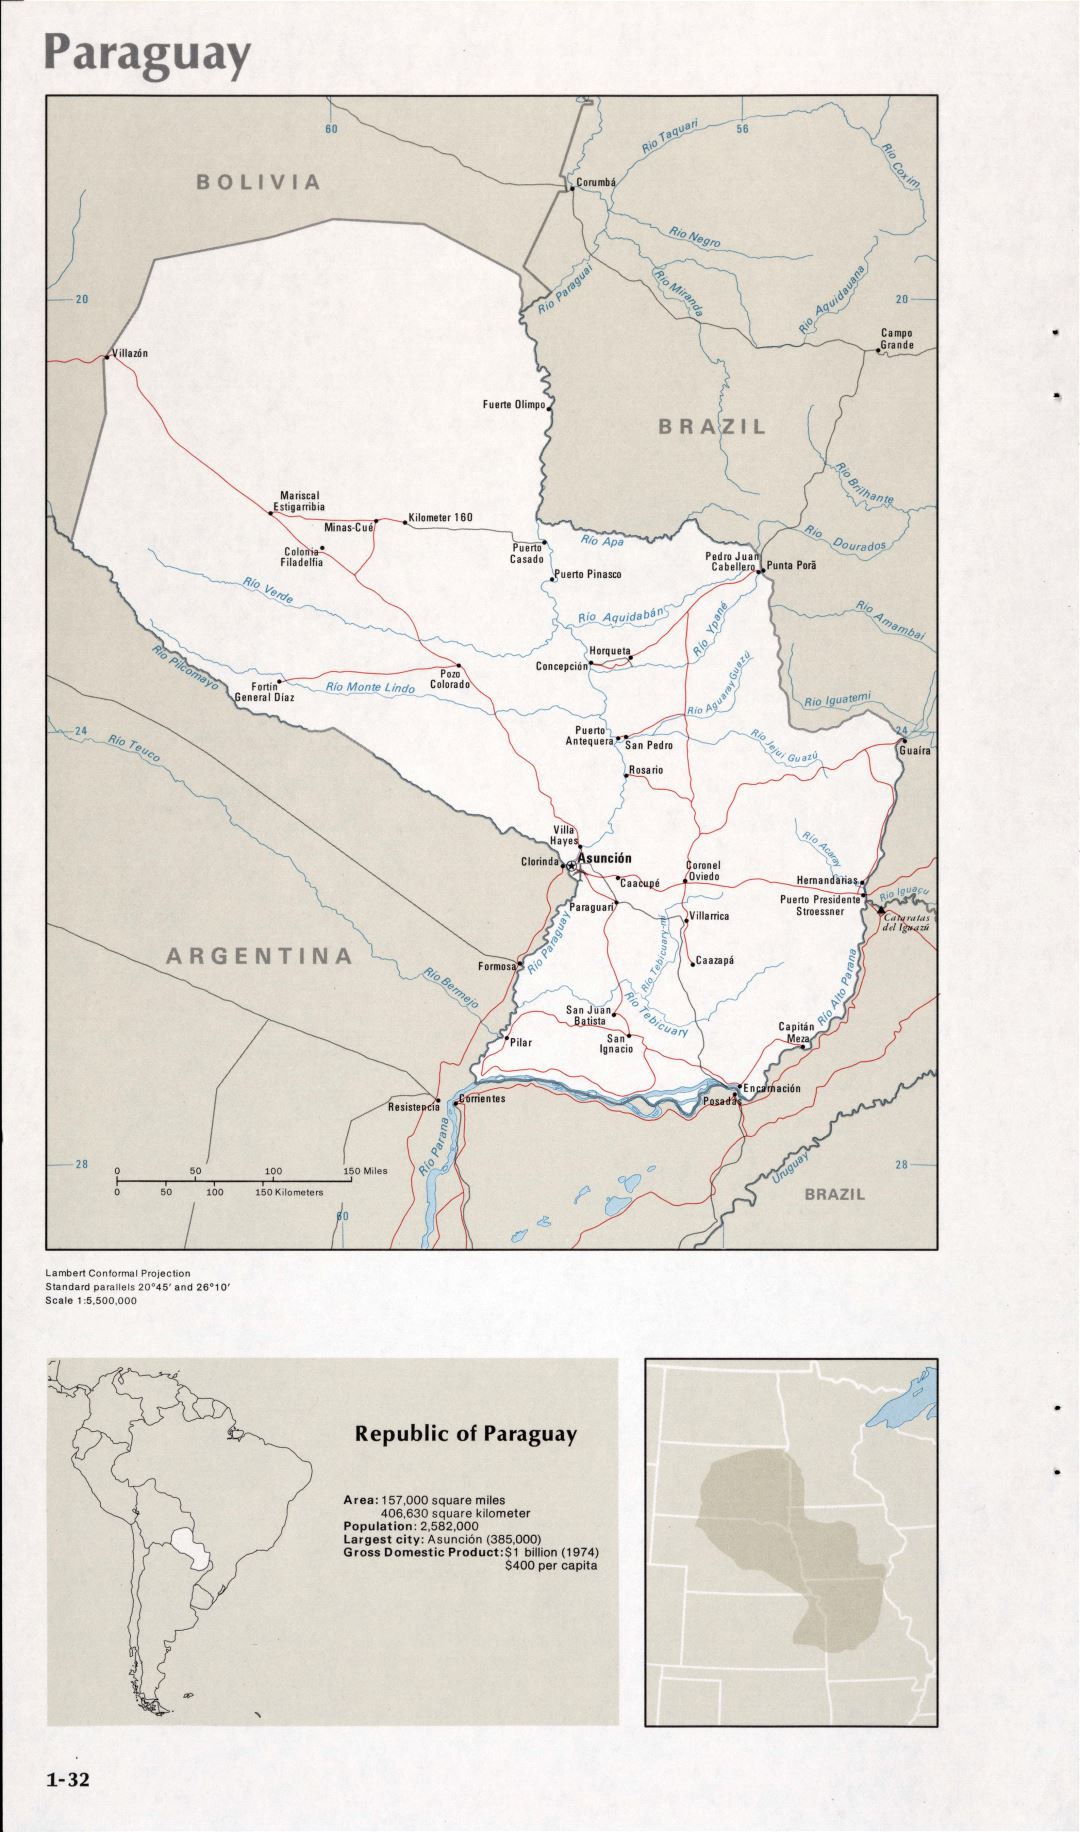 Map of Paraguay (1-32)